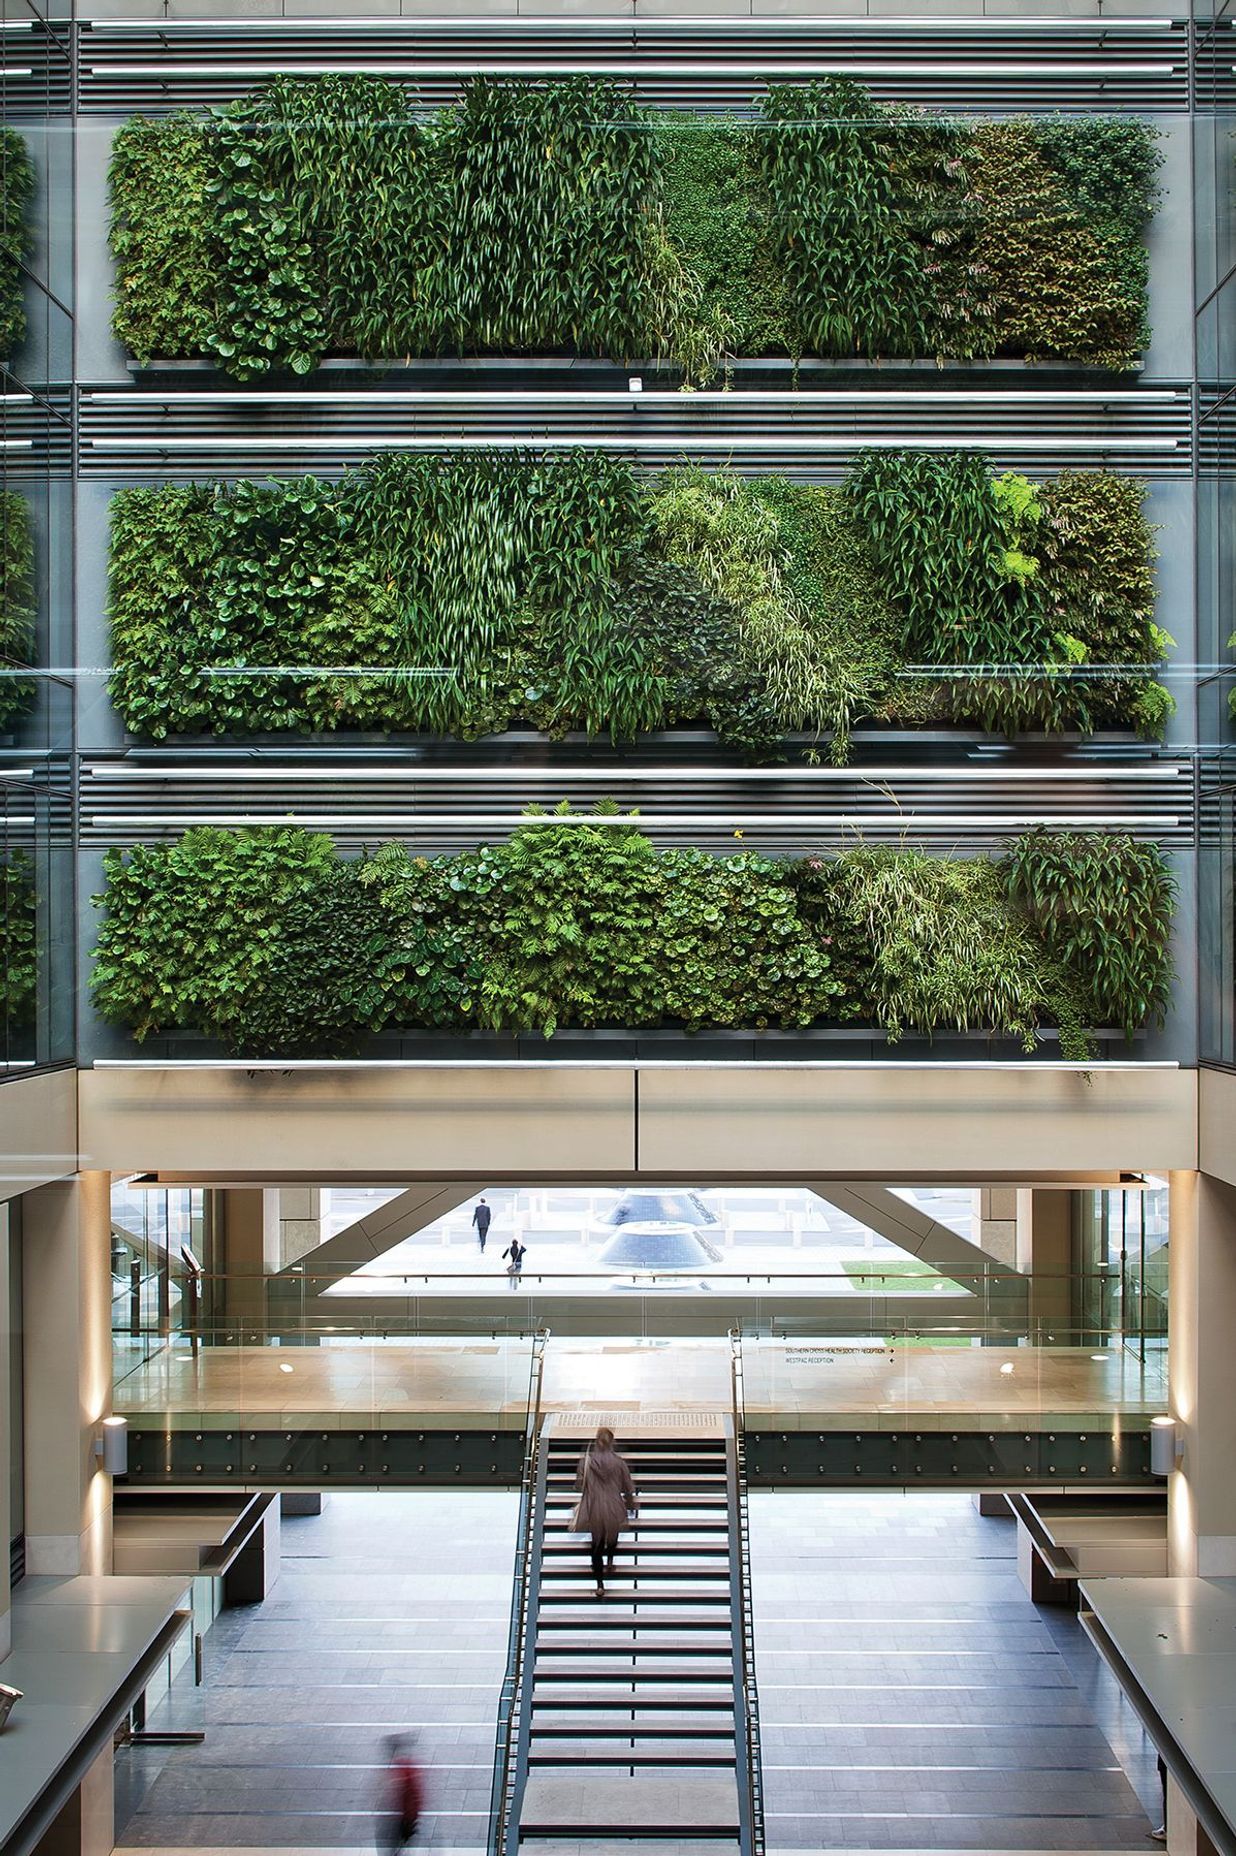 This green wall installation at Auckland's Britomart is composed of 60 individual panels containing a mix of natives and exotic epiphytes.